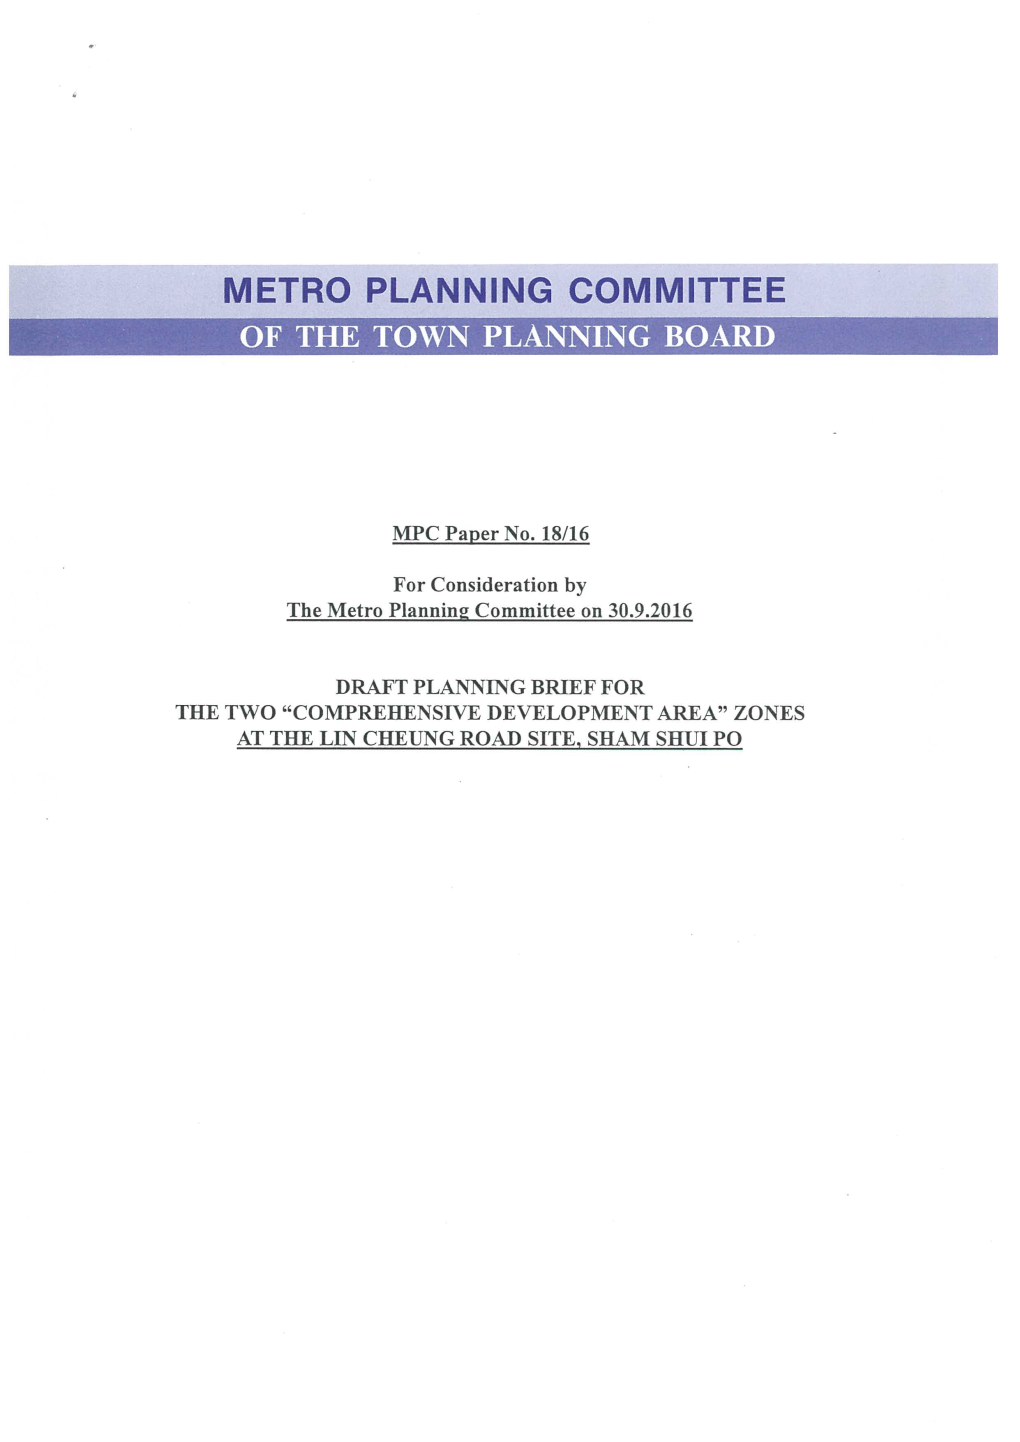 MPC Paper No. 18/16 for Consideration by the Metro Planning Committee on 30.9.2016